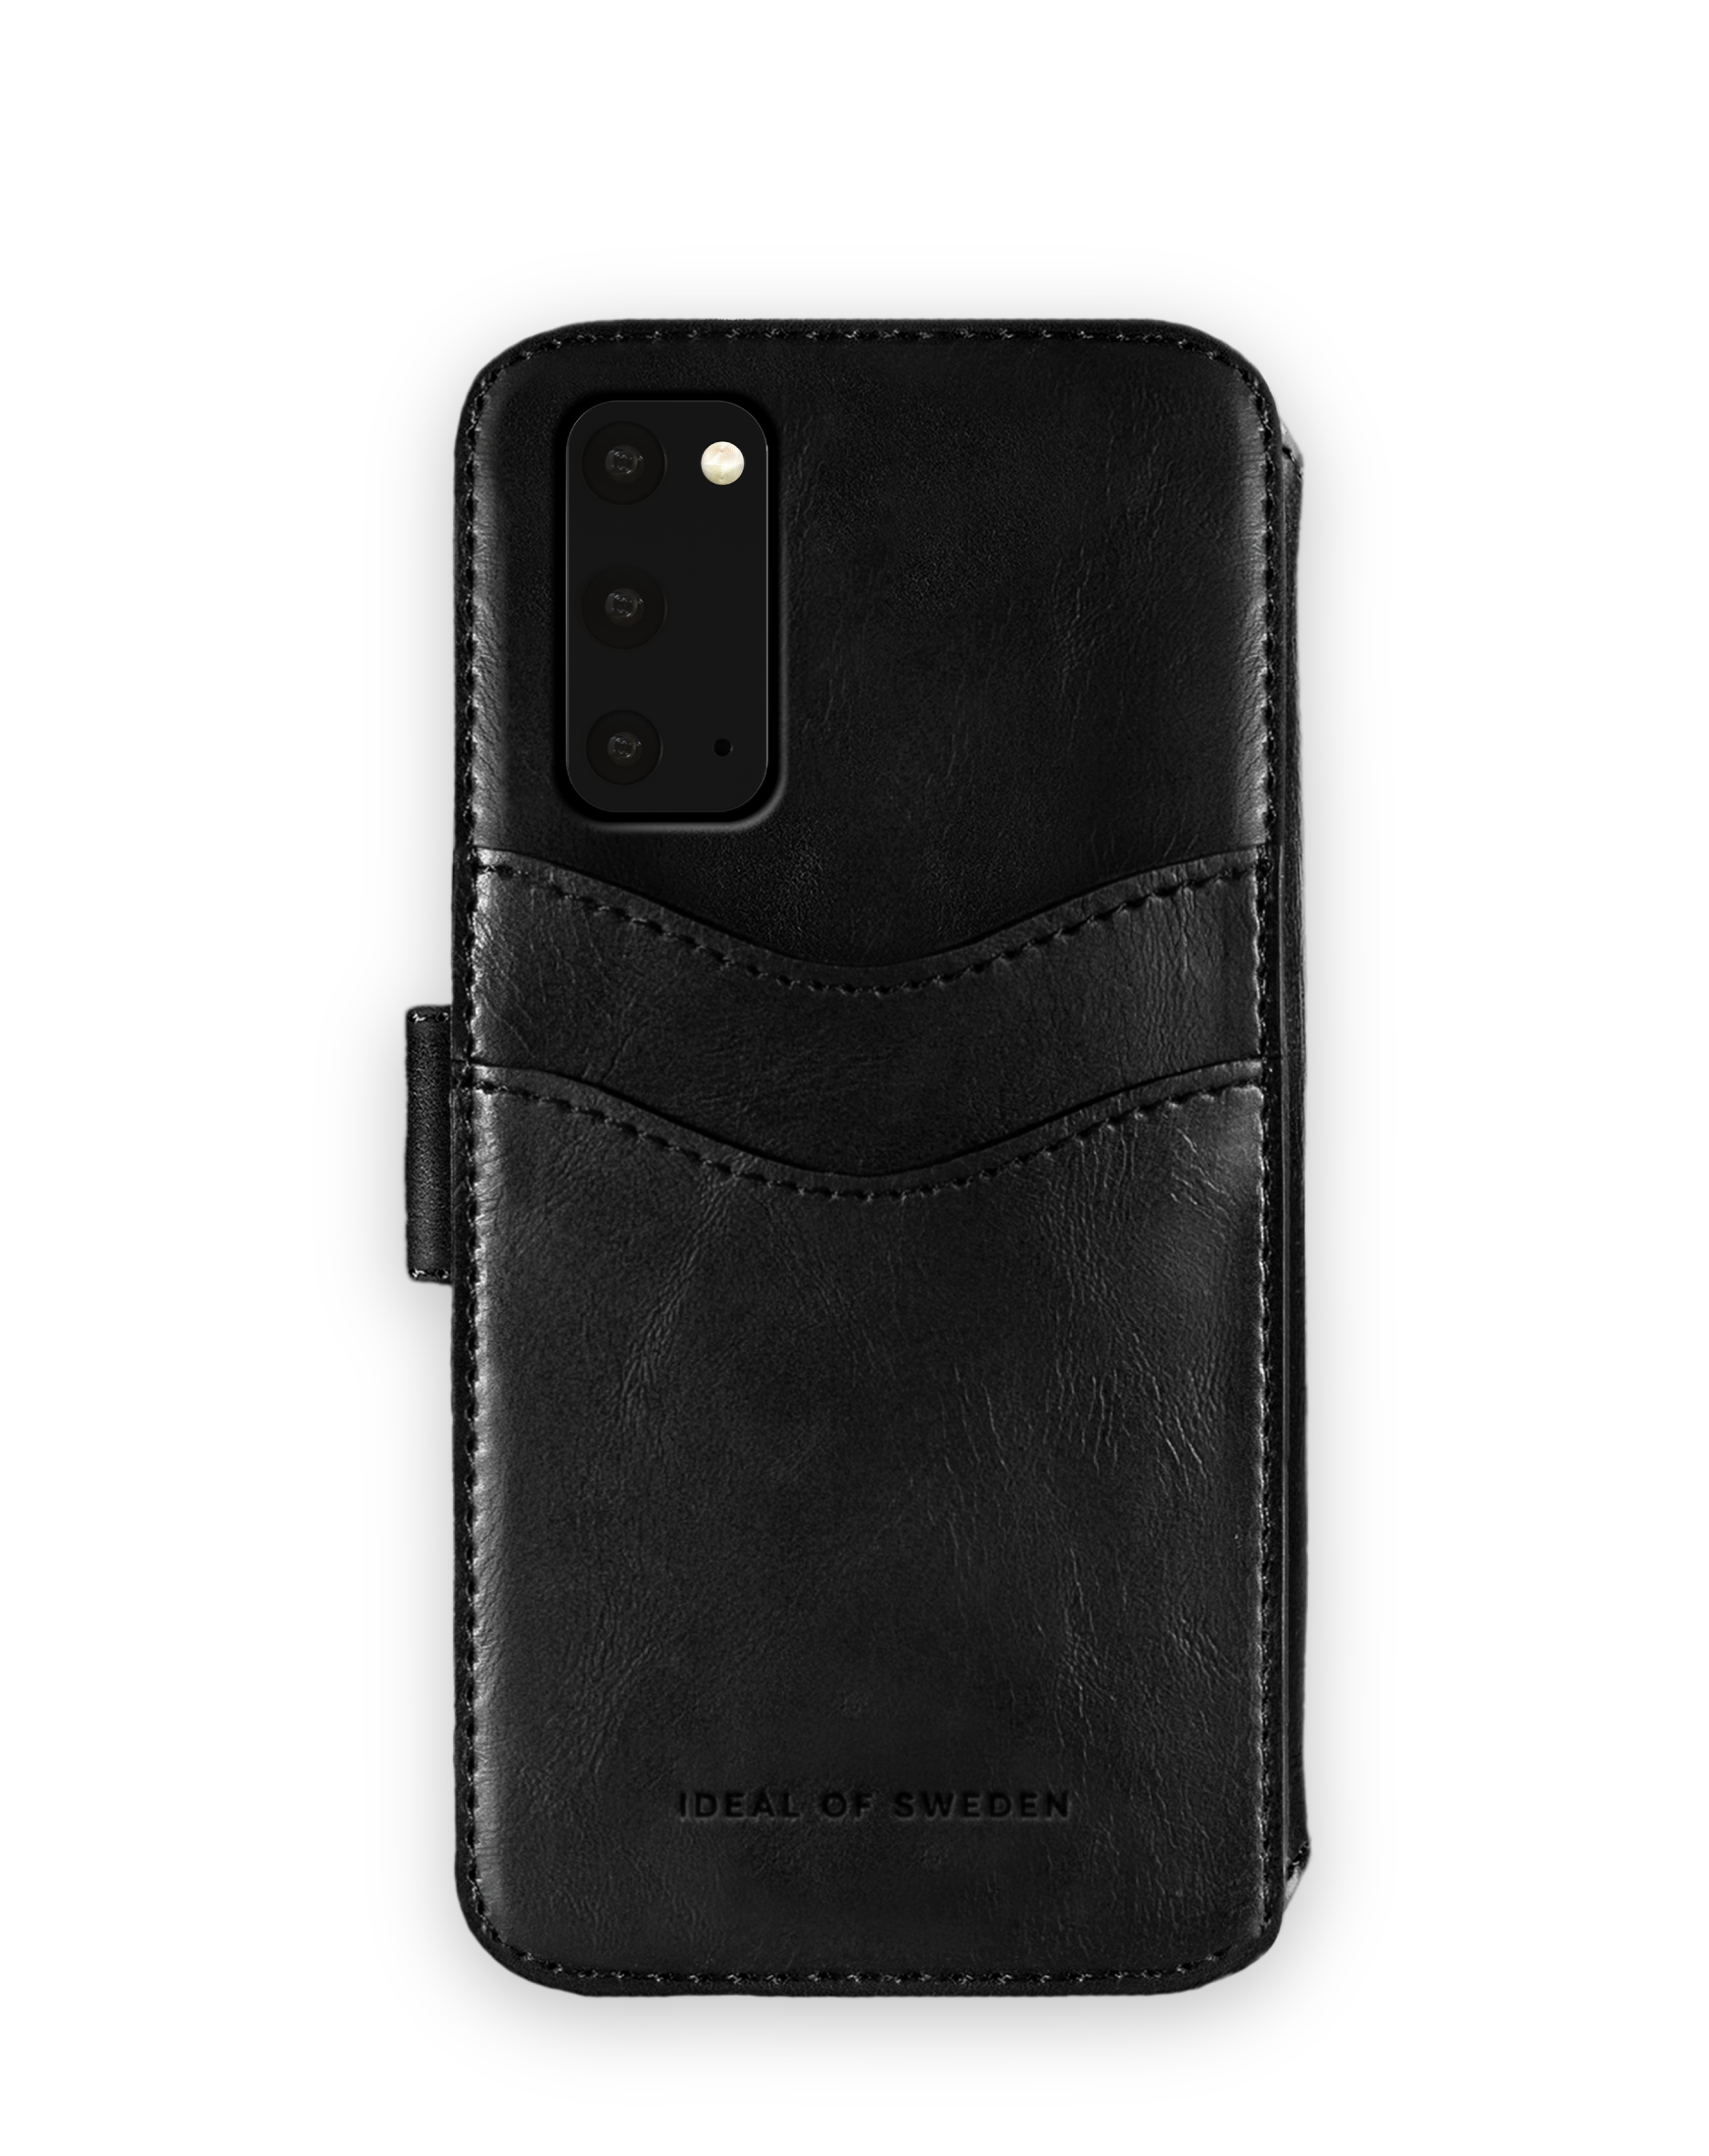 S20 Cover, Full Ultra, SWEDEN Samsung, Galaxy IDSTHW-S11P-01, Black IDEAL OF